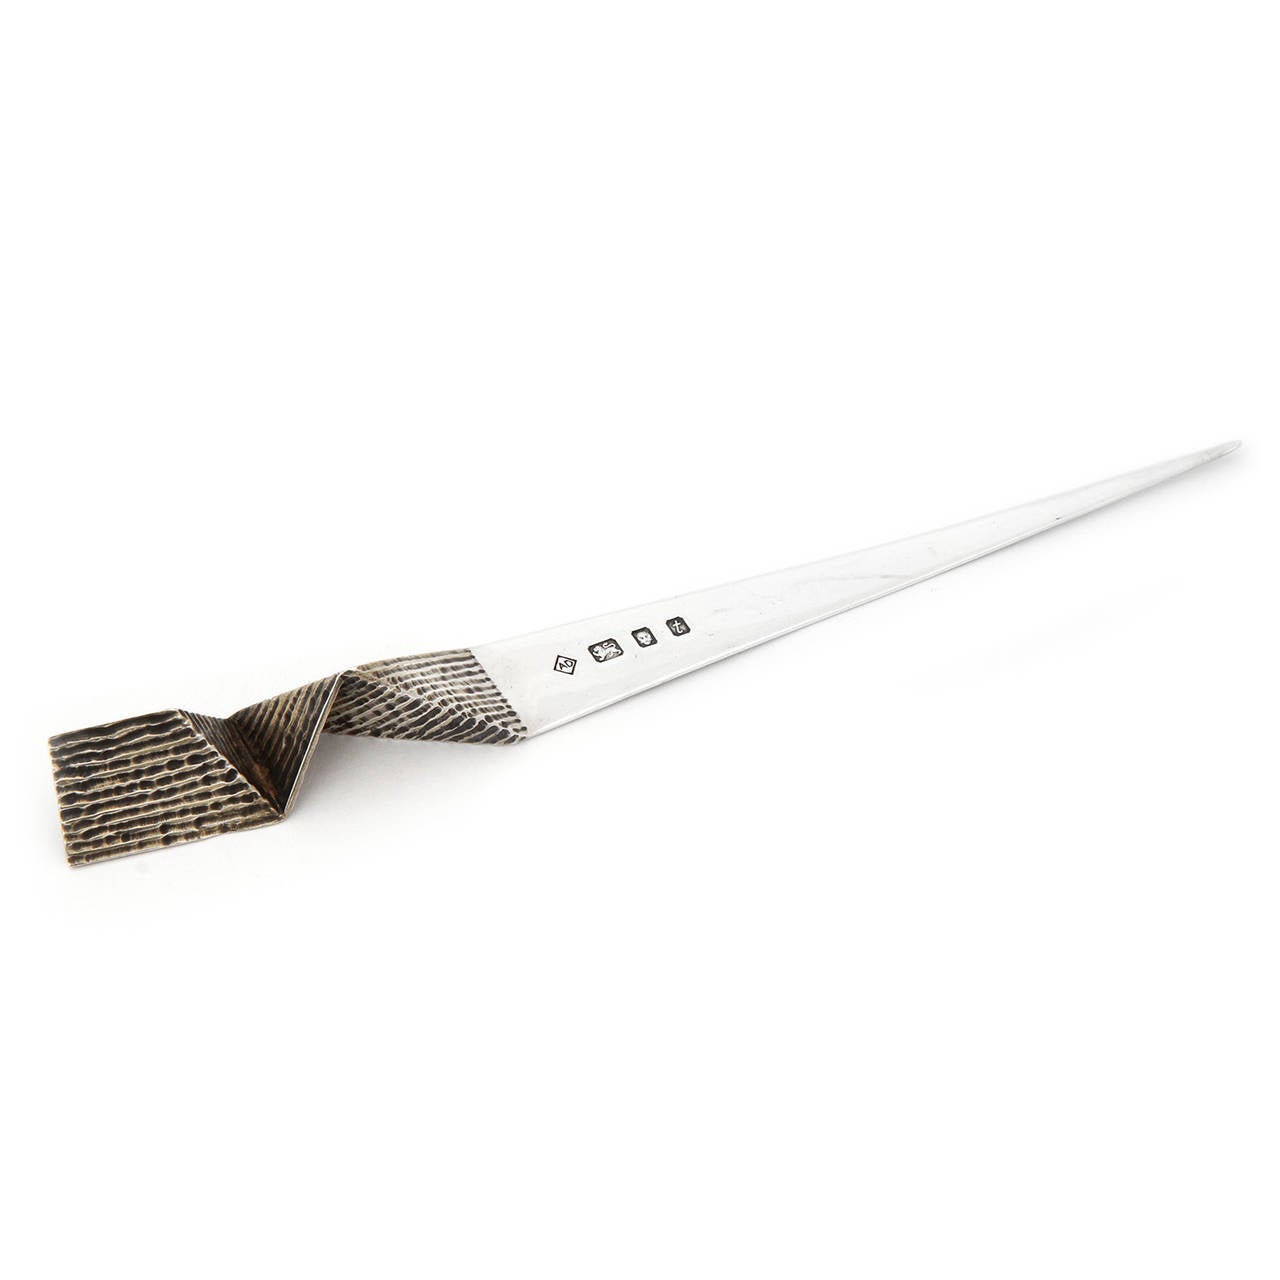 A beautiful and fully hallmarked modernist sterling silver letter opener by Alfred Dunhill. The letter opener features an expressive angled handle with gilding and striation.